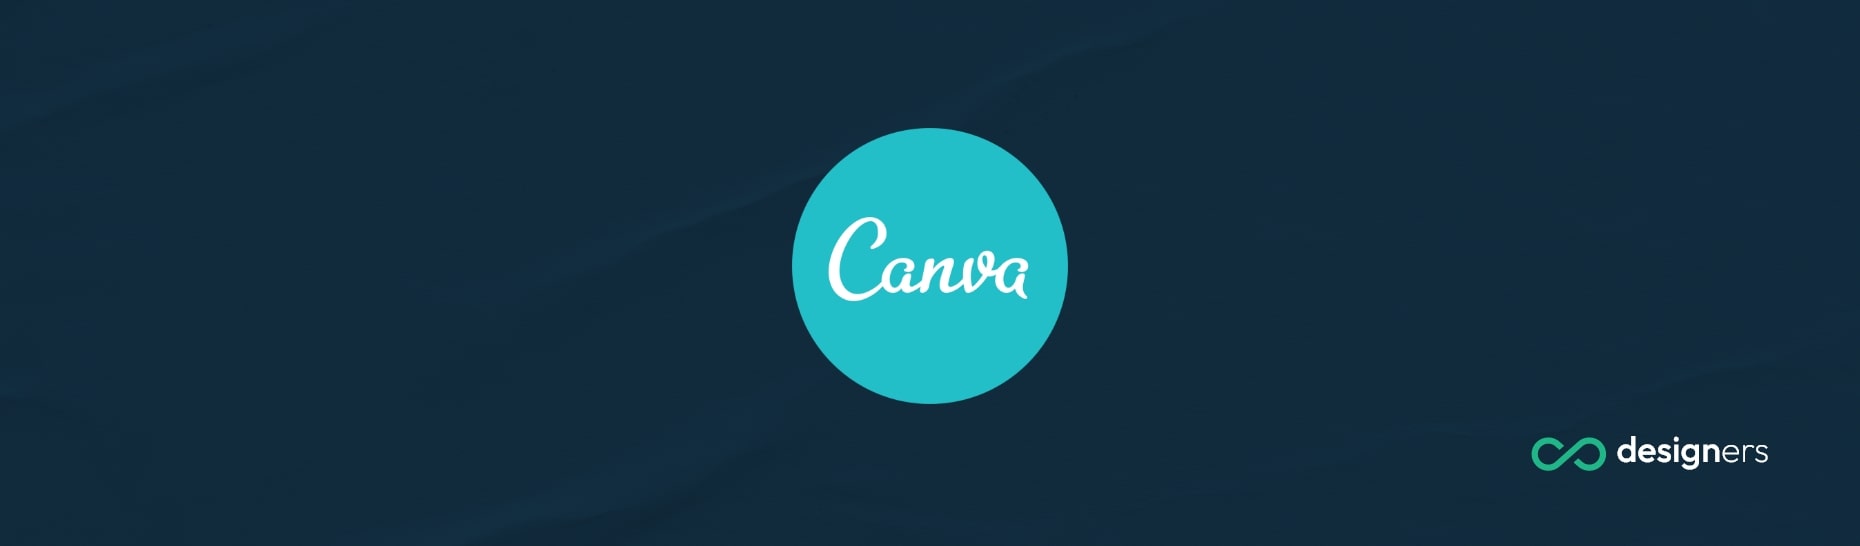 How To Split a Picture in Canva for Free?